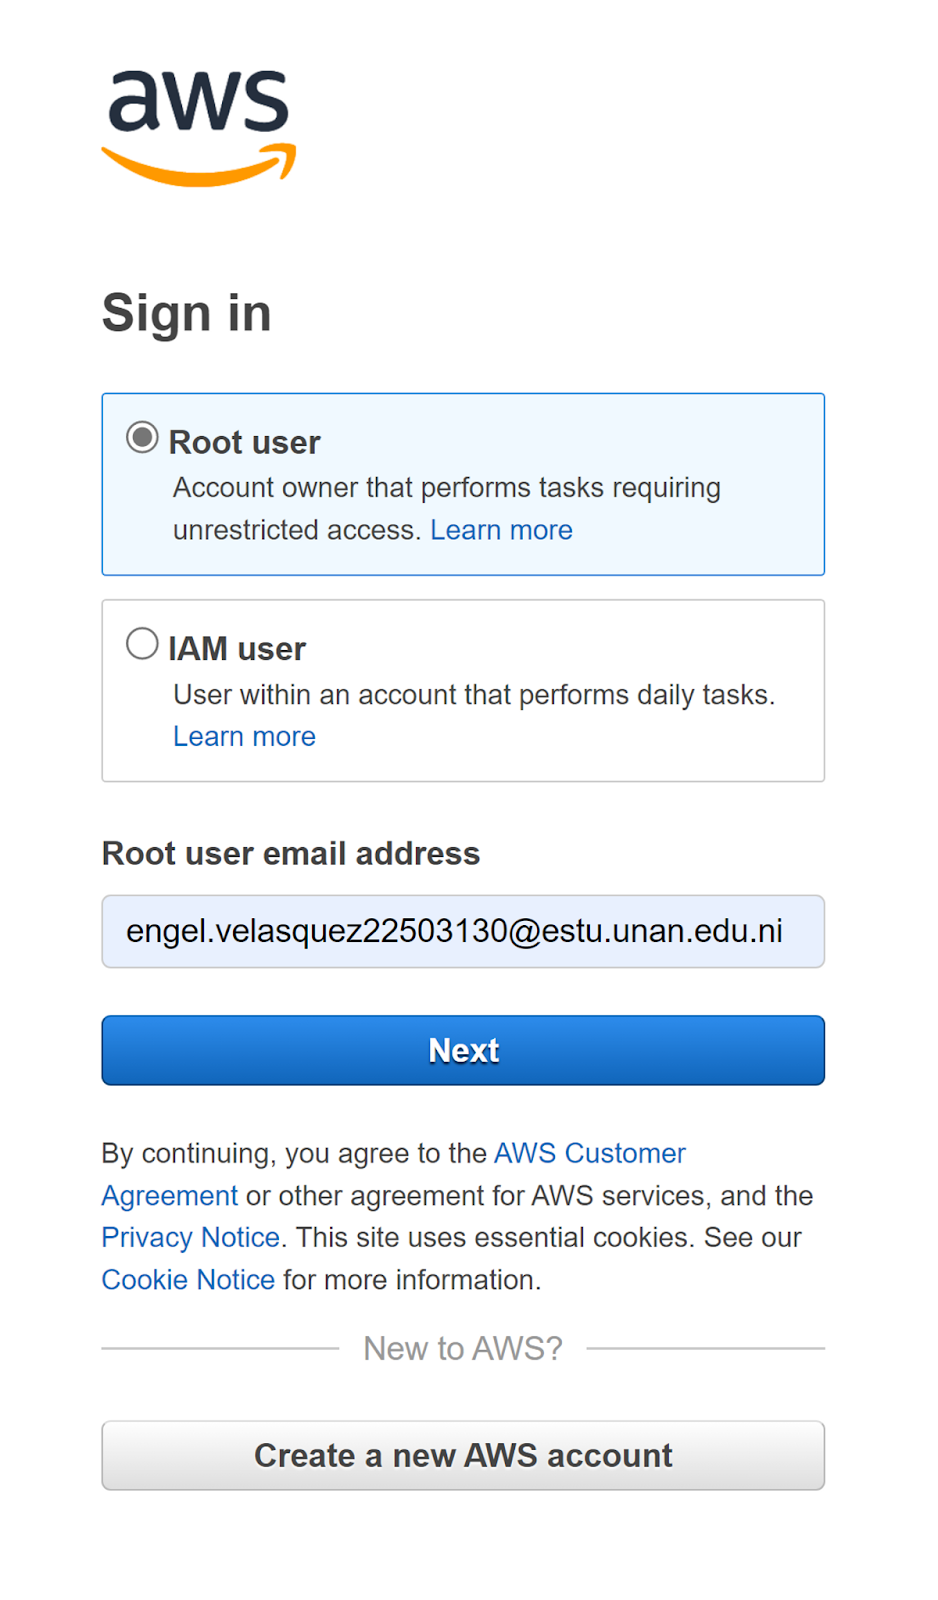 Provide the email address for your root account: